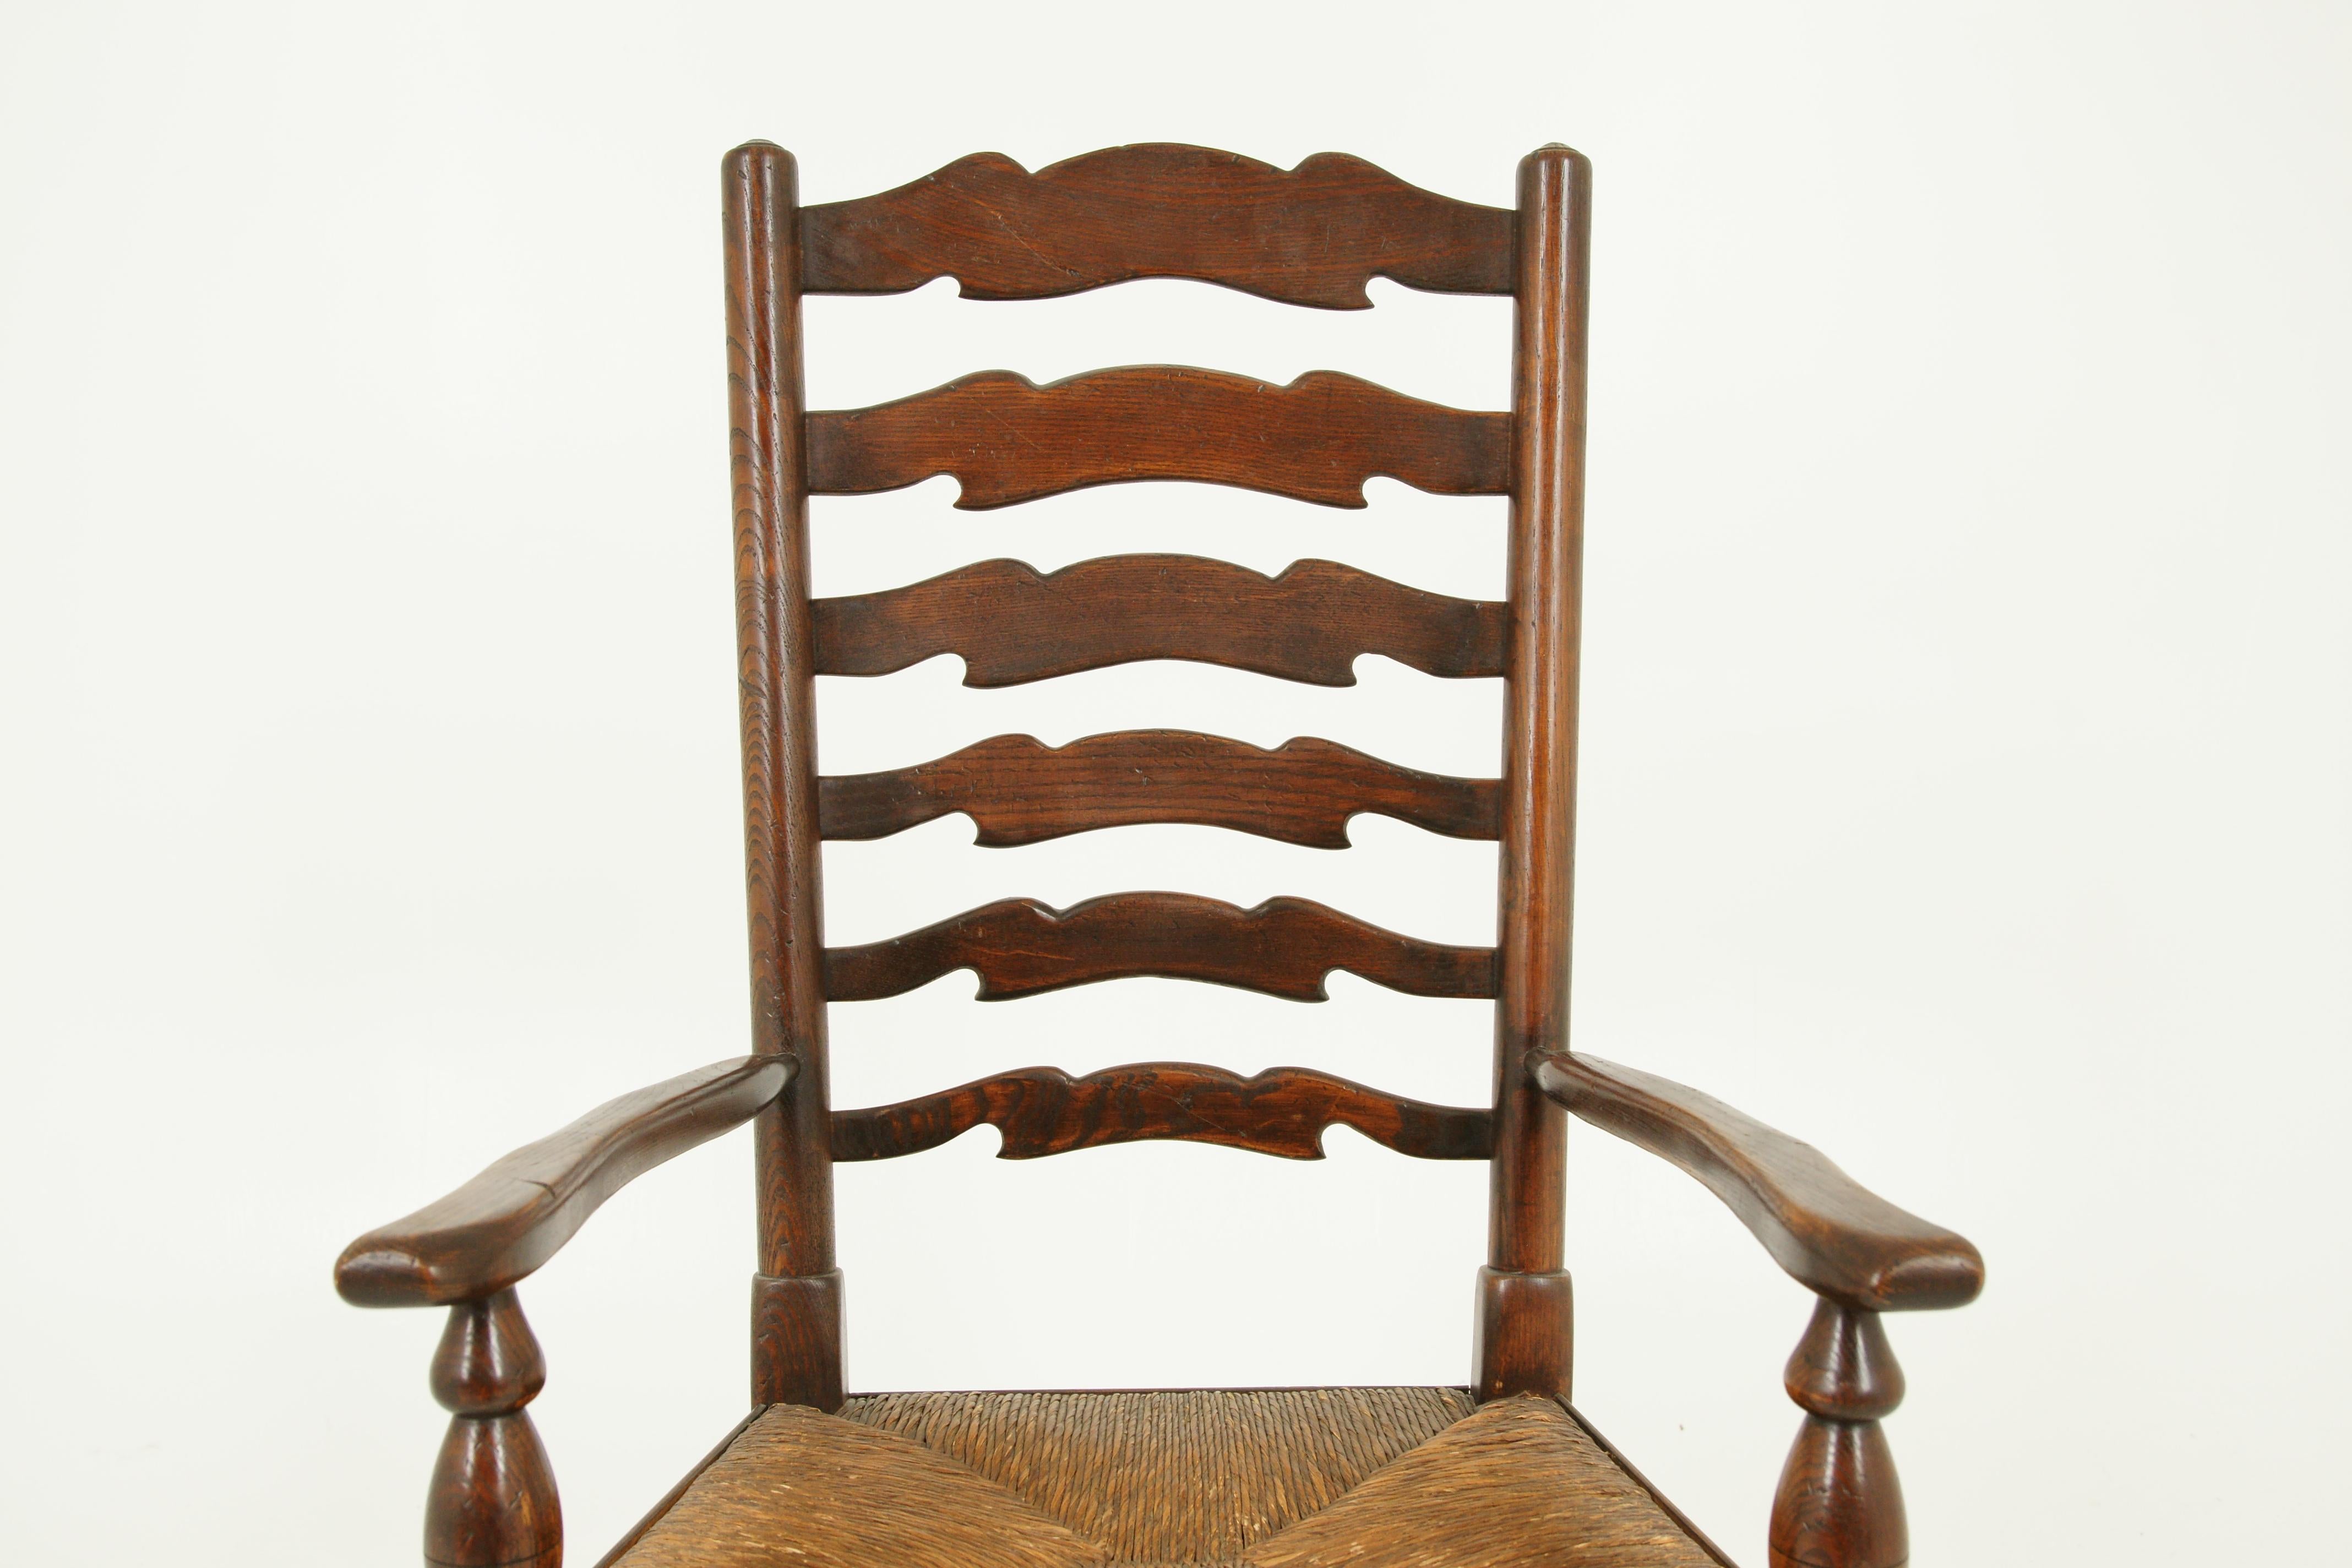 Antique ladder-back chair, rush seat, elm, Scotland 1920, Antique Furniture, B1154

Solid elm construction
Original finish
With graduated two tier ladder to the back
Raised on cylindrical column support
Shaped arm rests
Lift out woven rush